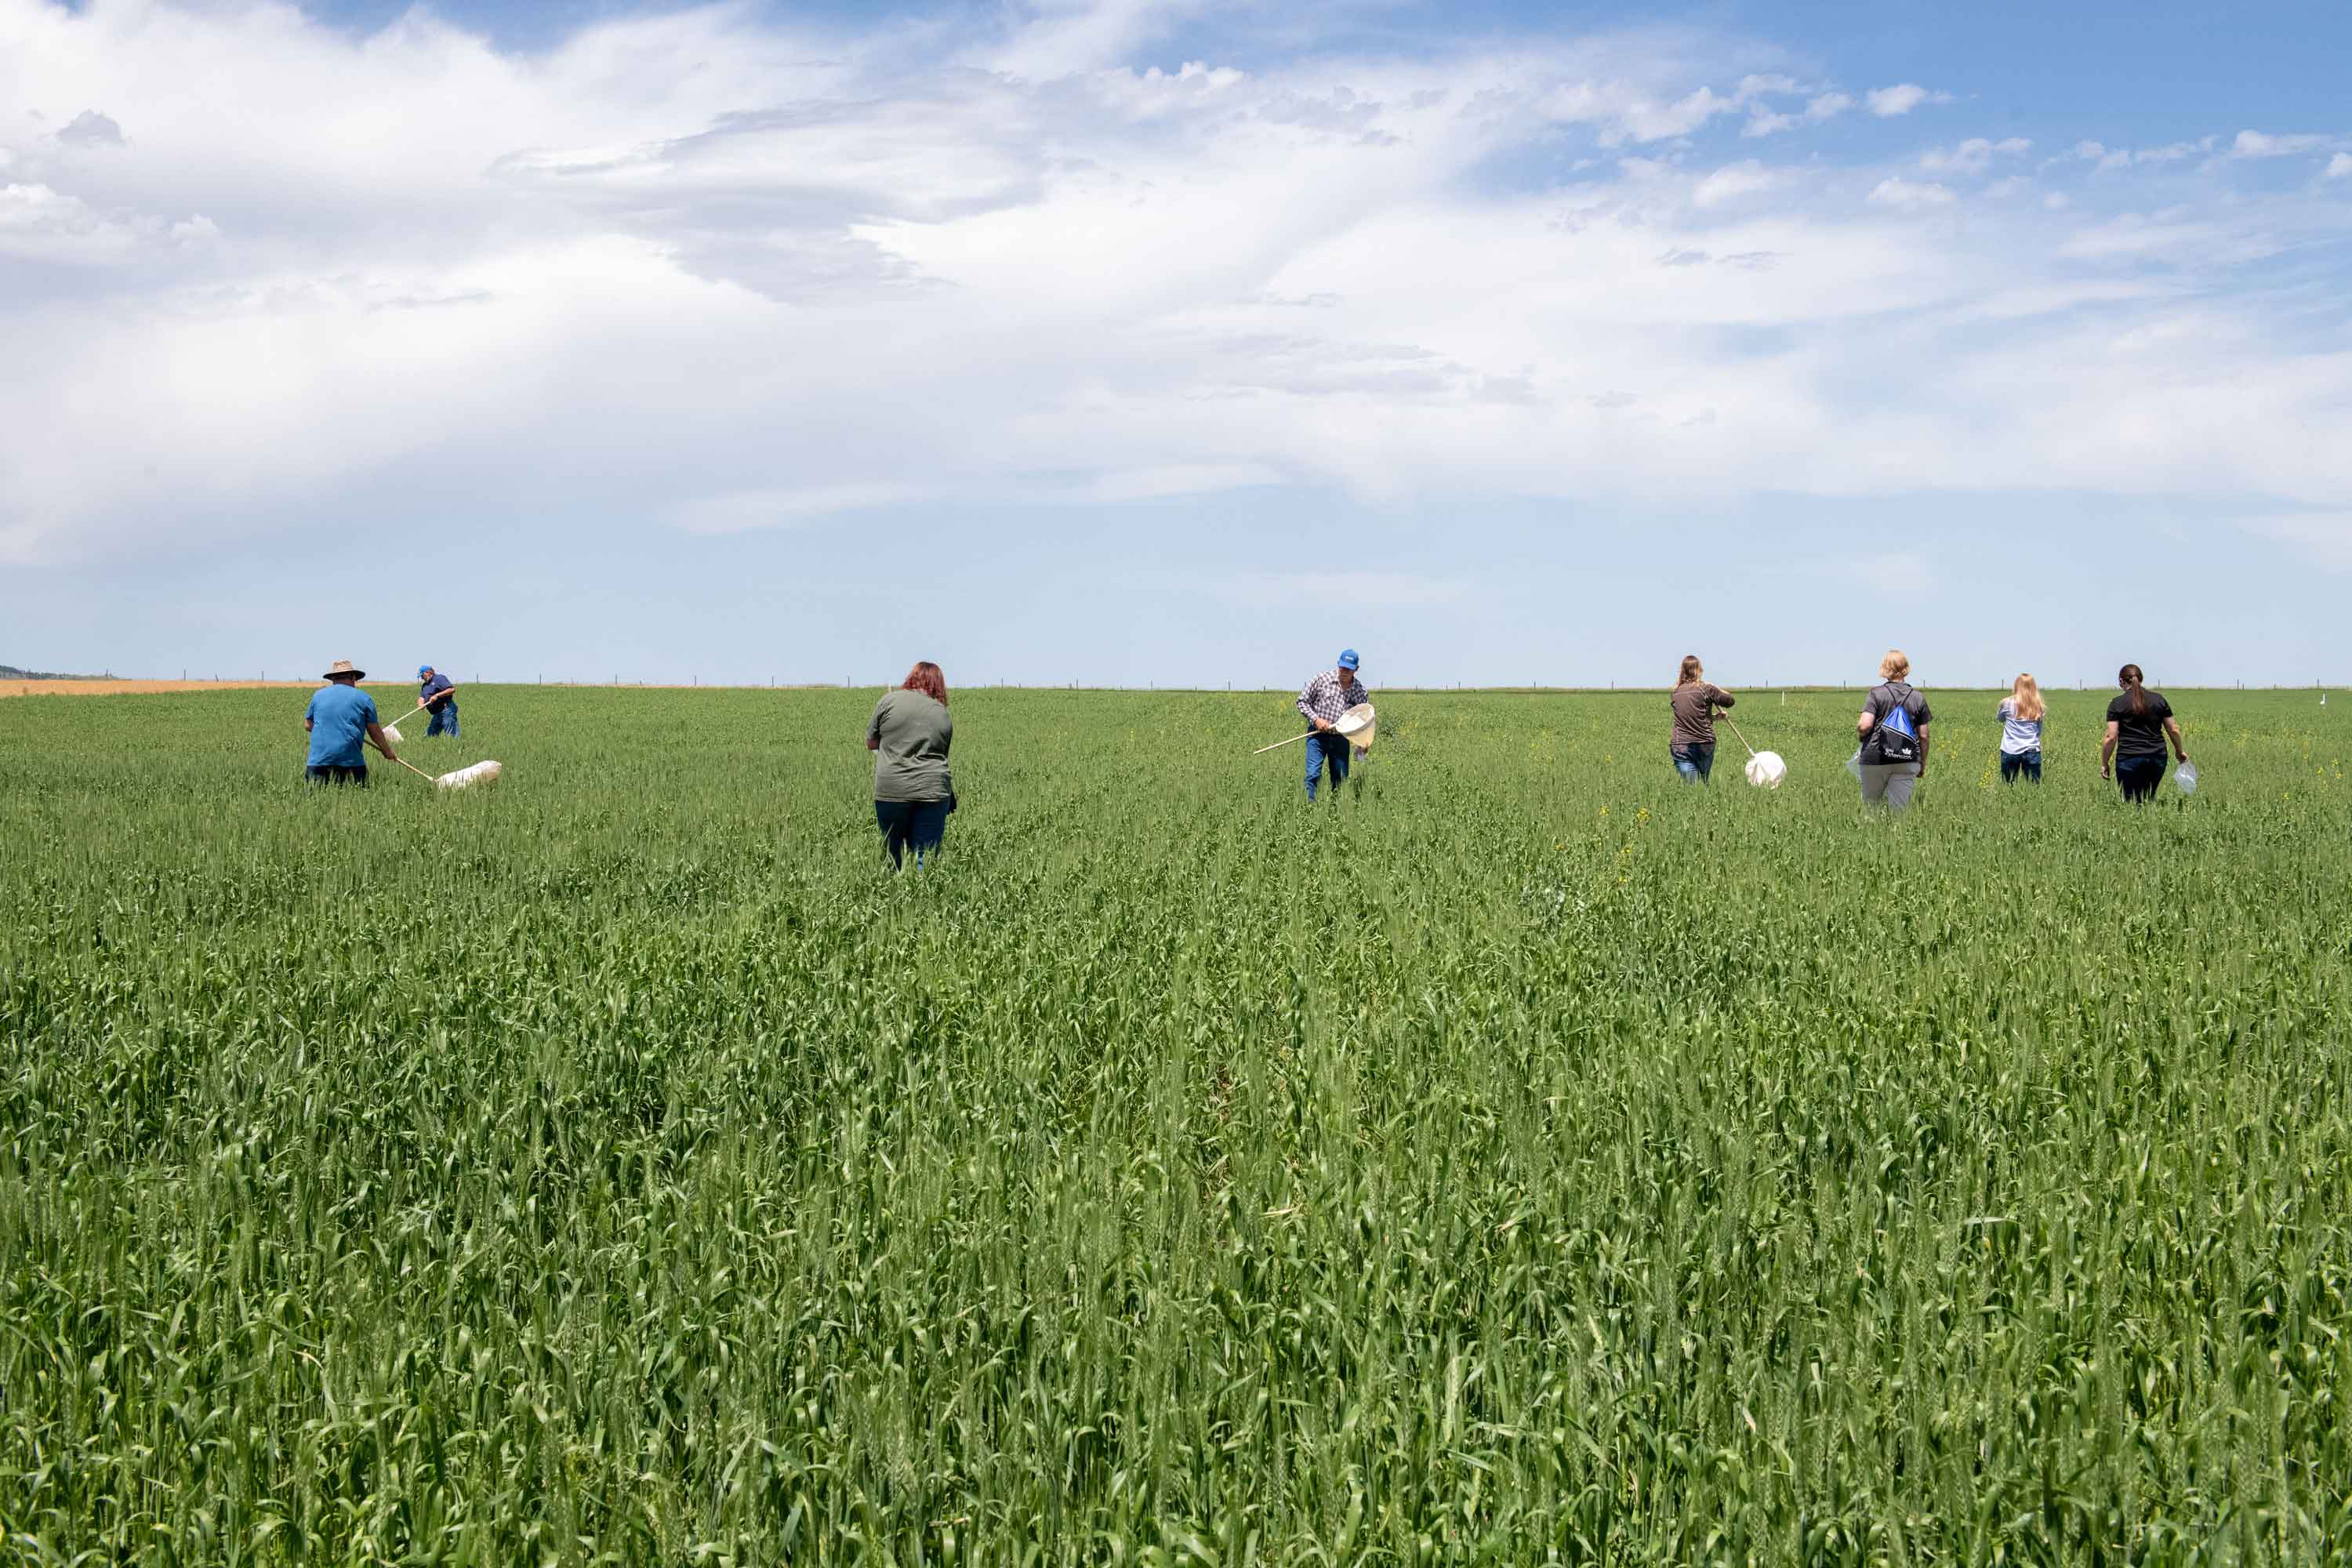 Seven people stand at a distance in a green field. The sky is blue with a large cloud stretching across most of the horizon